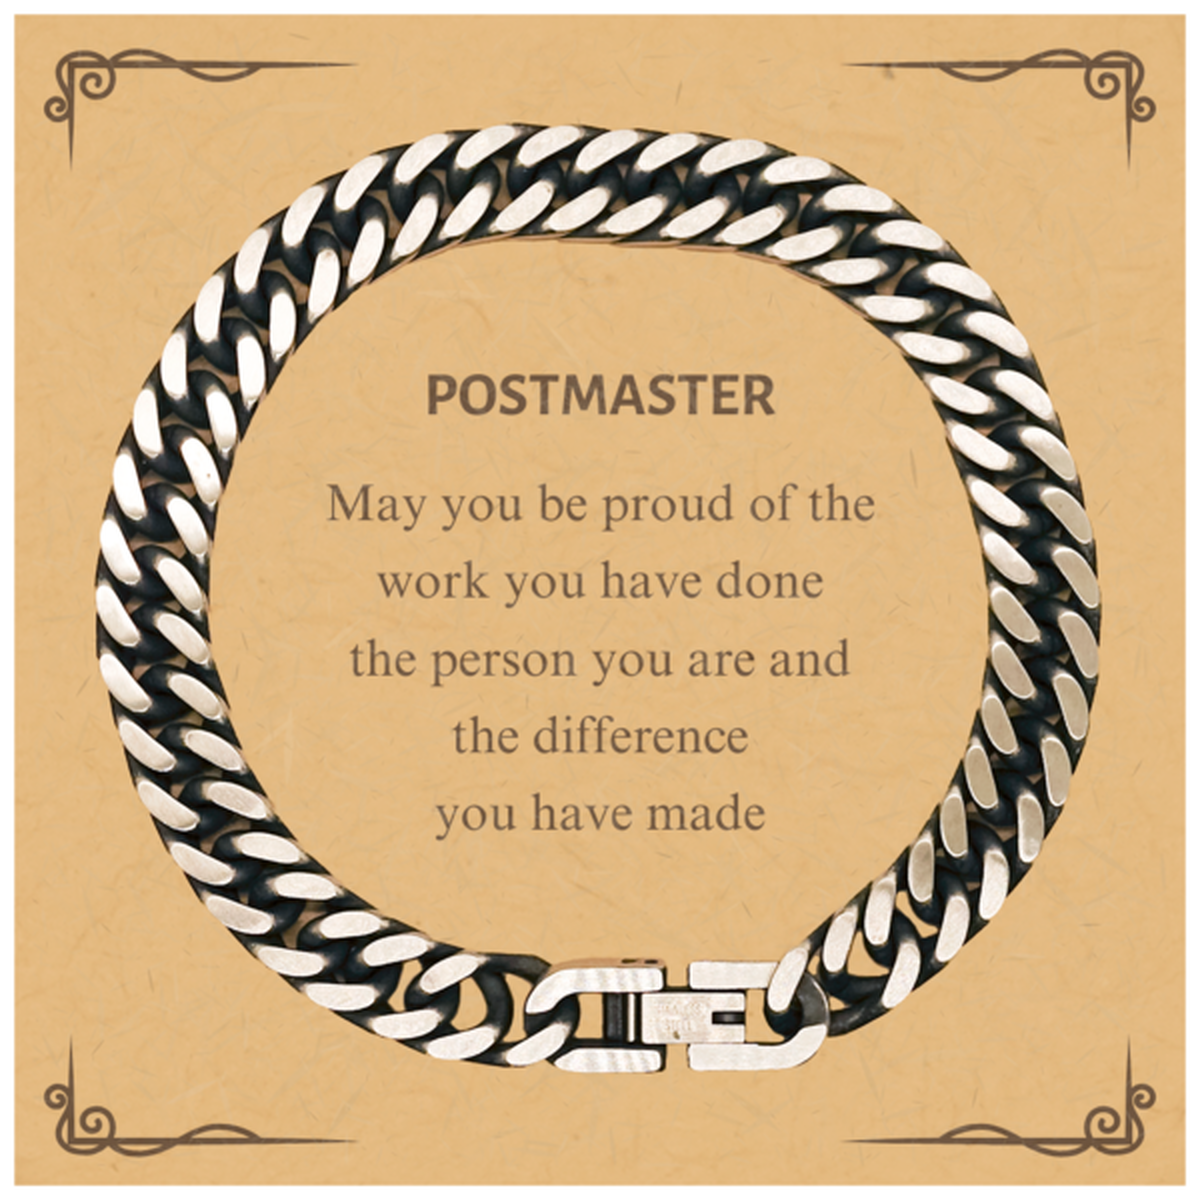 Postmaster May you be proud of the work you have done, Retirement Postmaster Cuban Link Chain Bracelet for Colleague Appreciation Gifts Amazing for Postmaster